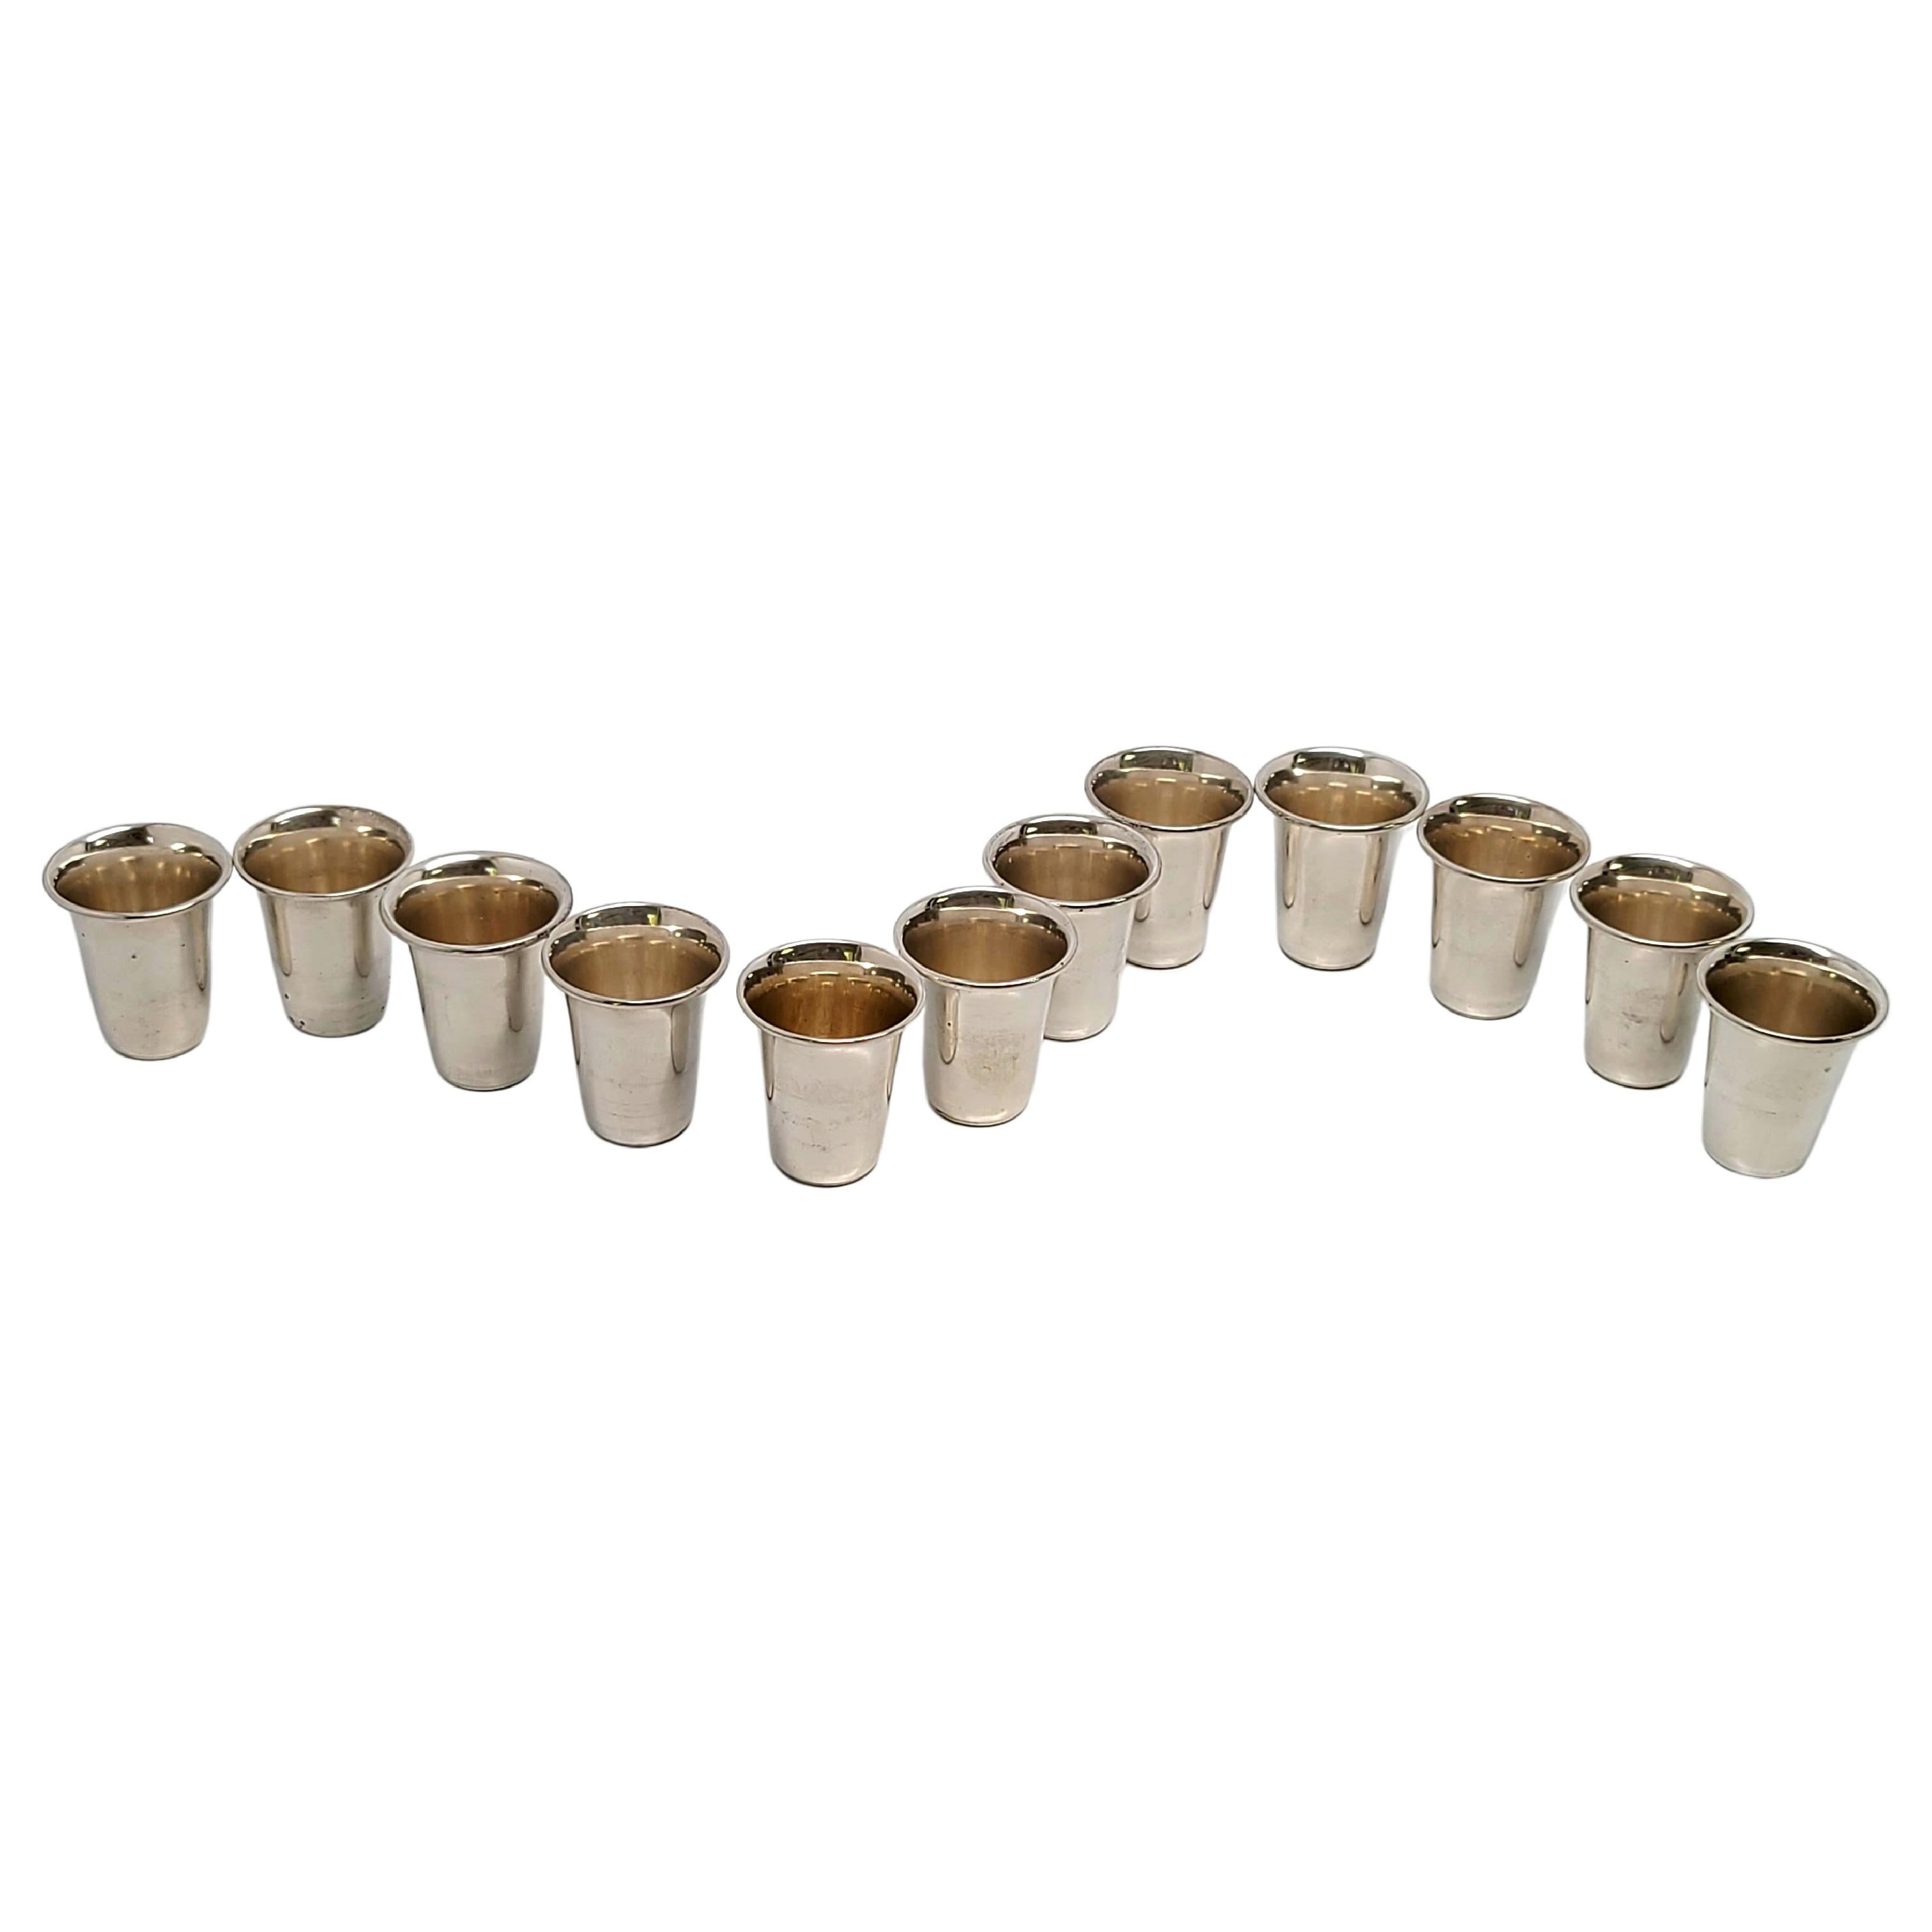 Set of 12 vintage sterling silver vodka or kiddush cup.

Beautifully simple and timeless, these cups feature a polished finish with a rolled lip.

Each cup measures 1 5/8